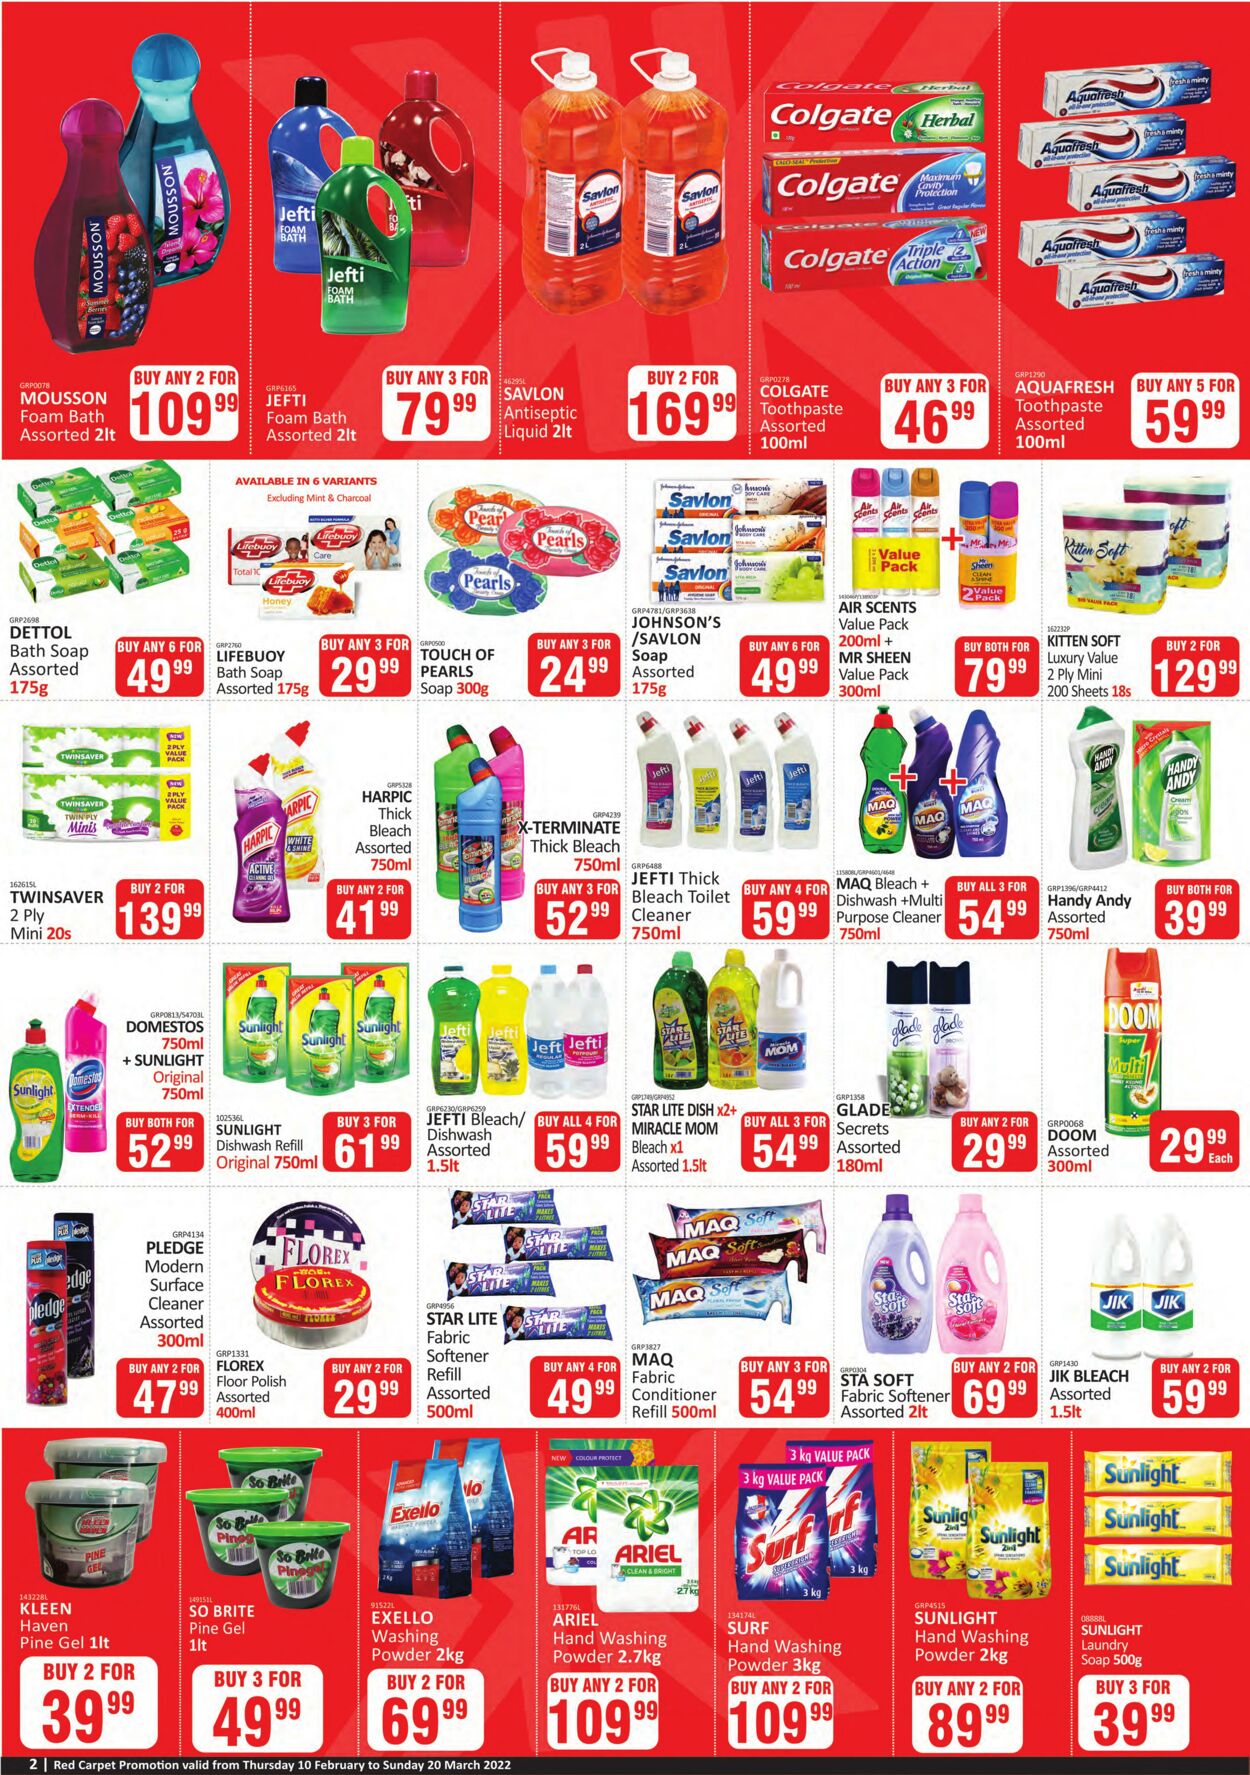 Kit Kat Cash and Carry Promotional Leaflet - Valid from 10.02 to 20.03 ...